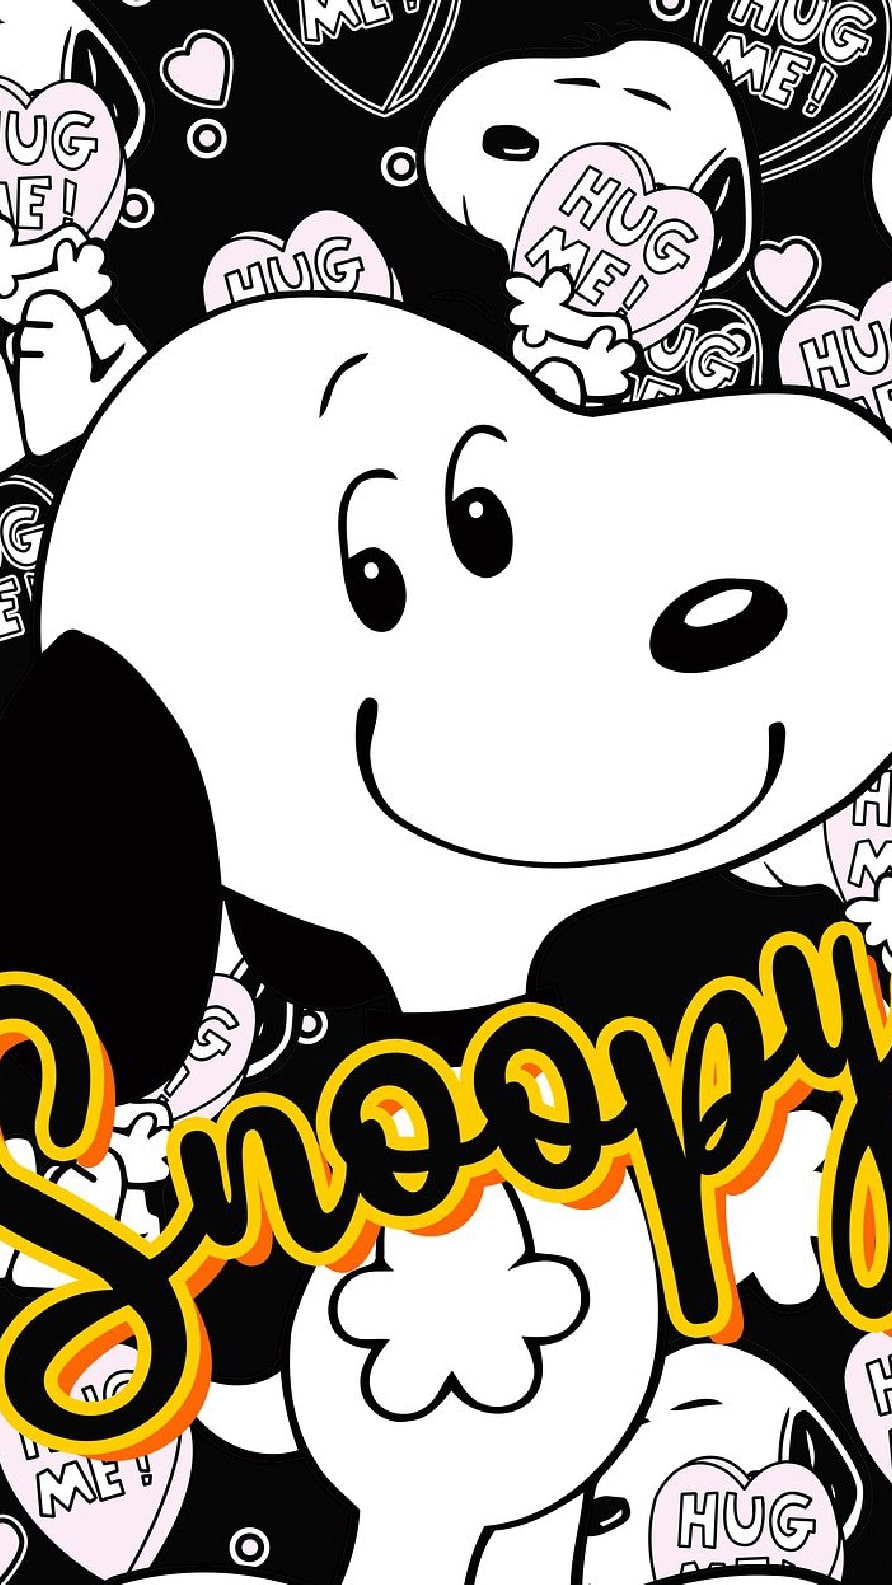 iPhone wallpapers featuring Snoopy